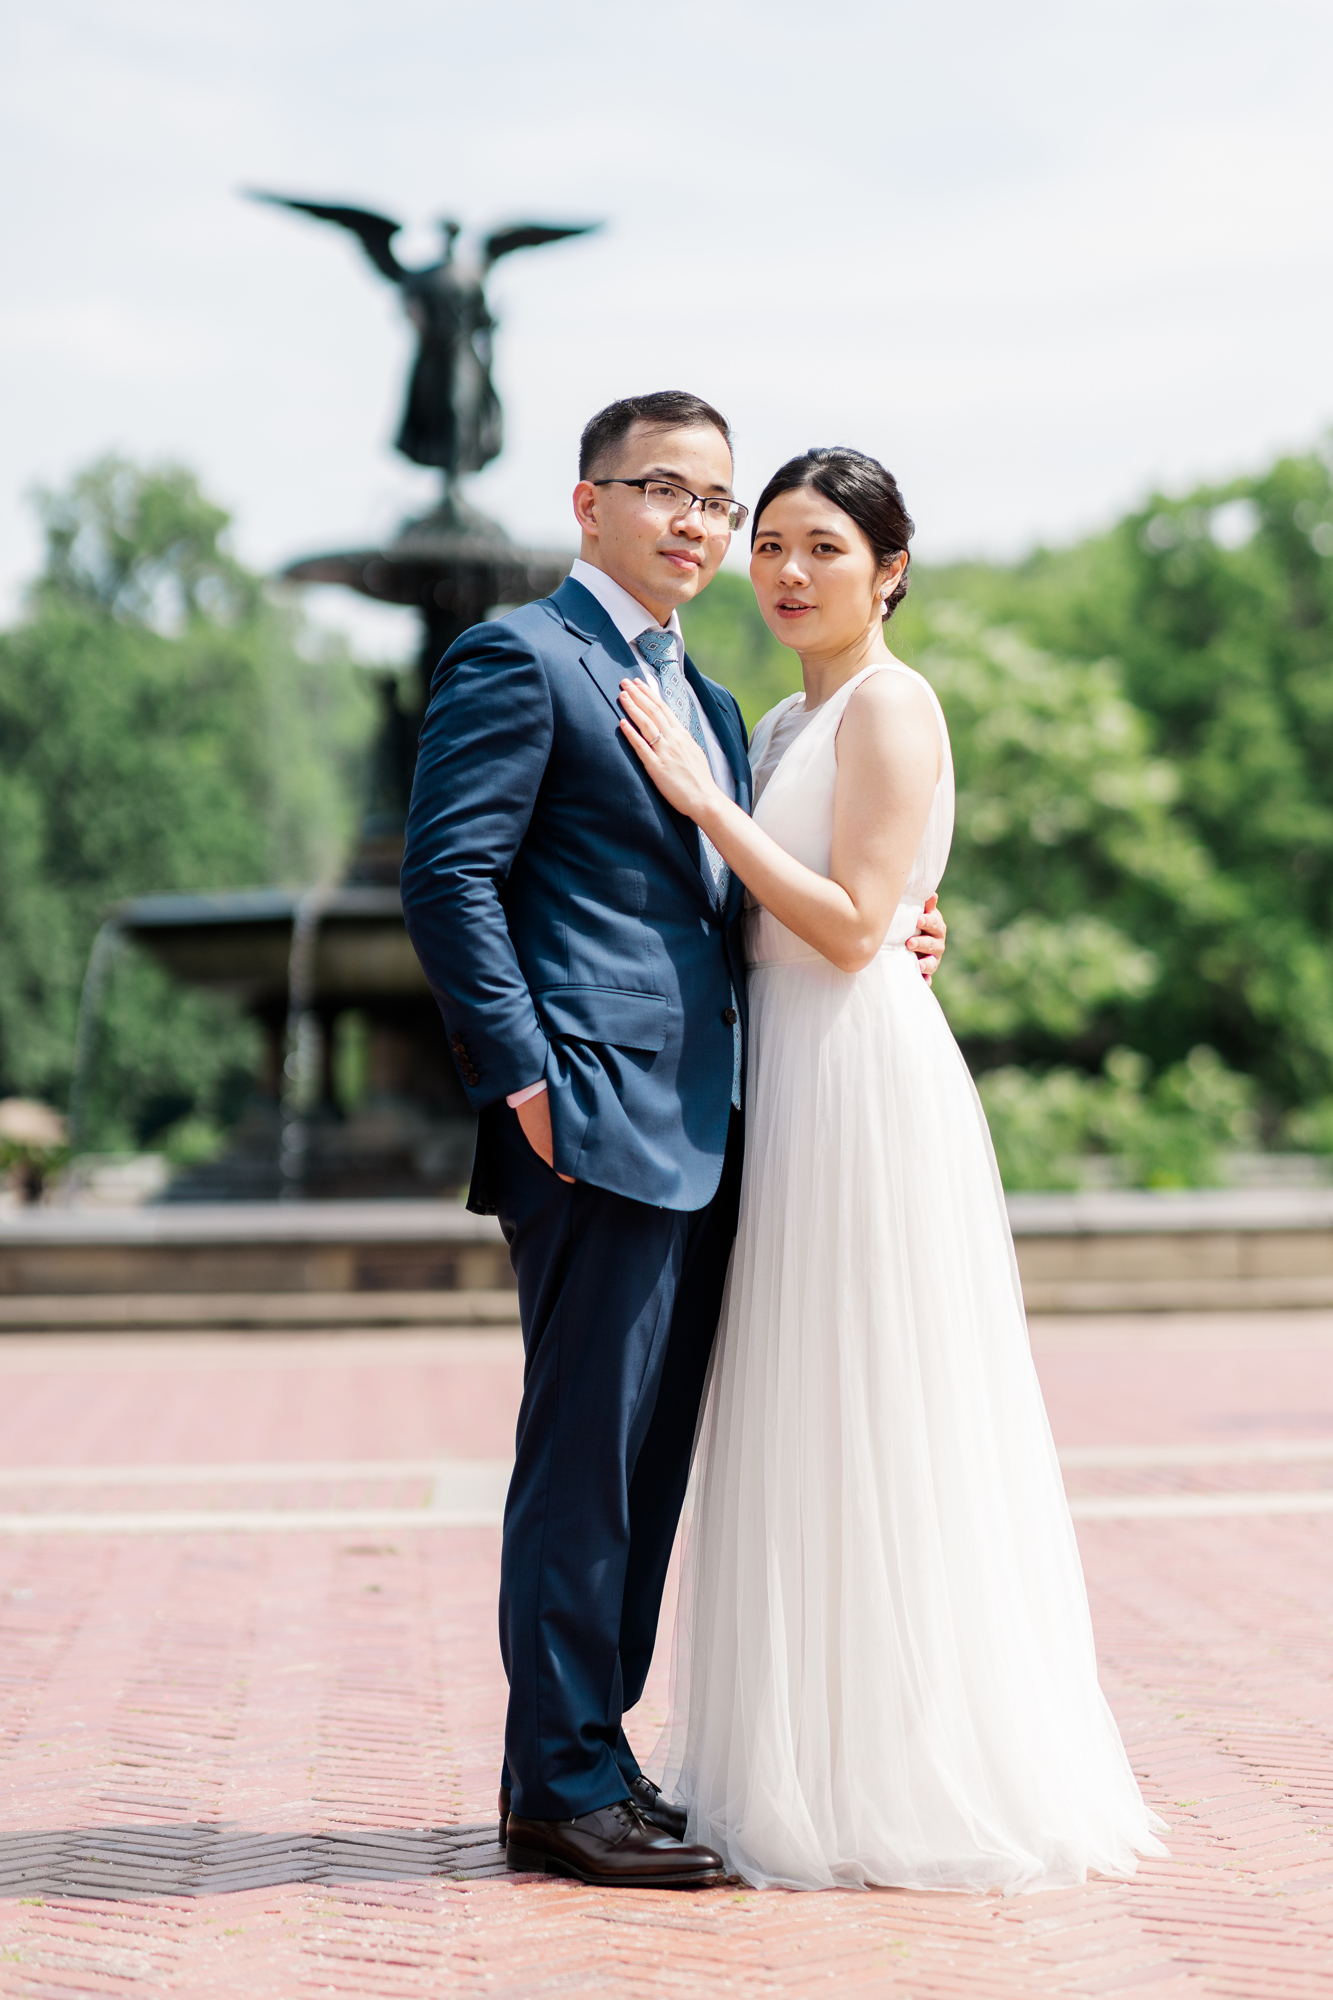 Idyllic Elopement Photography in New York\'s DUMBO and Central Park